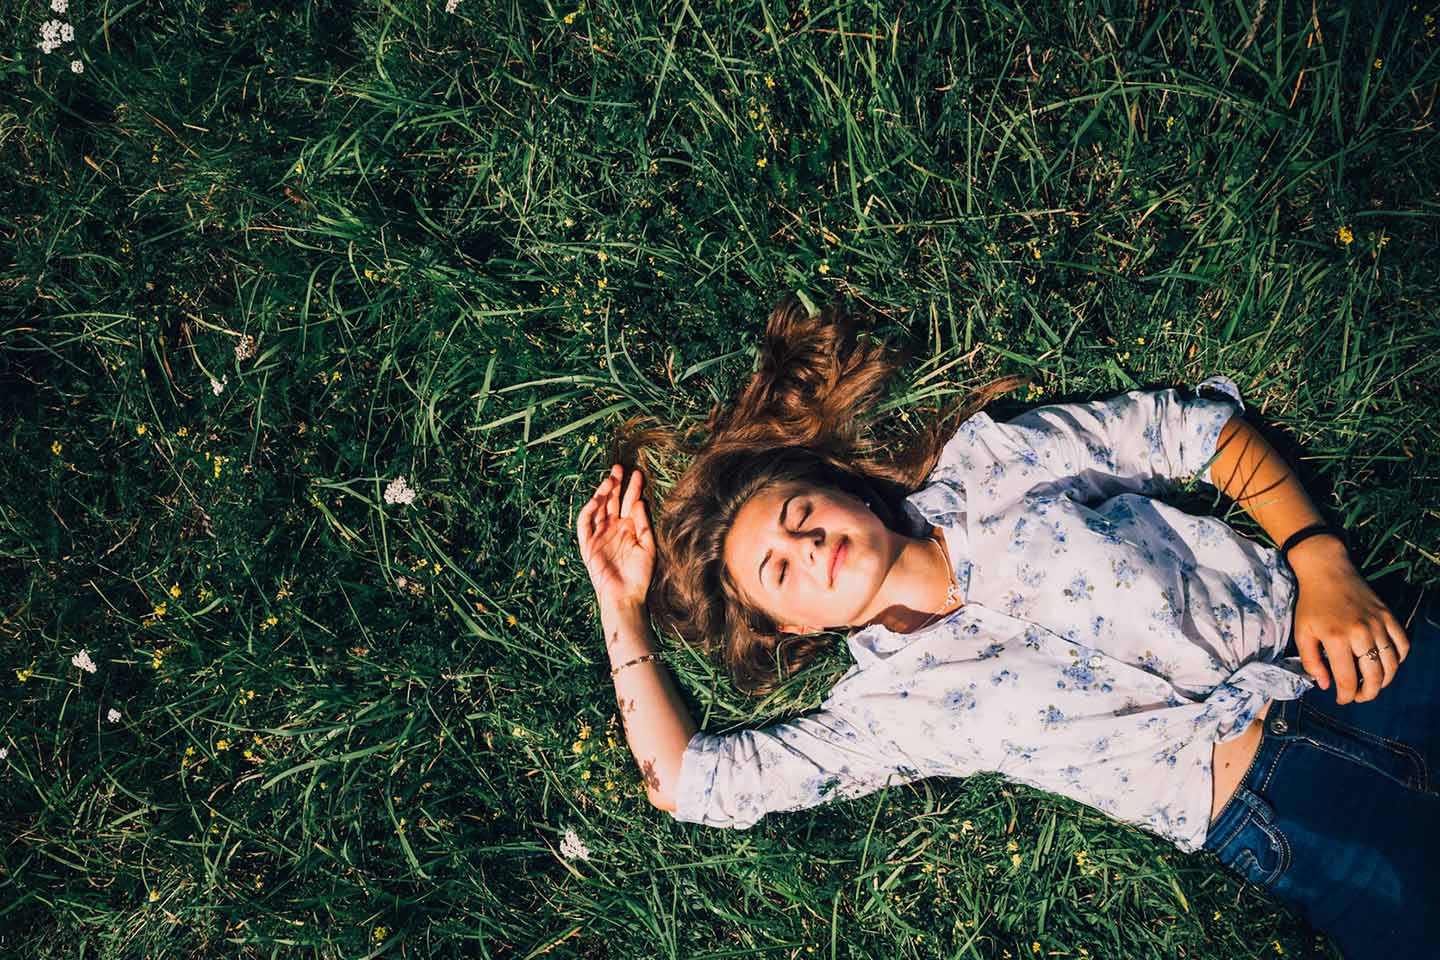 a woman sleeping peacefully on the grass